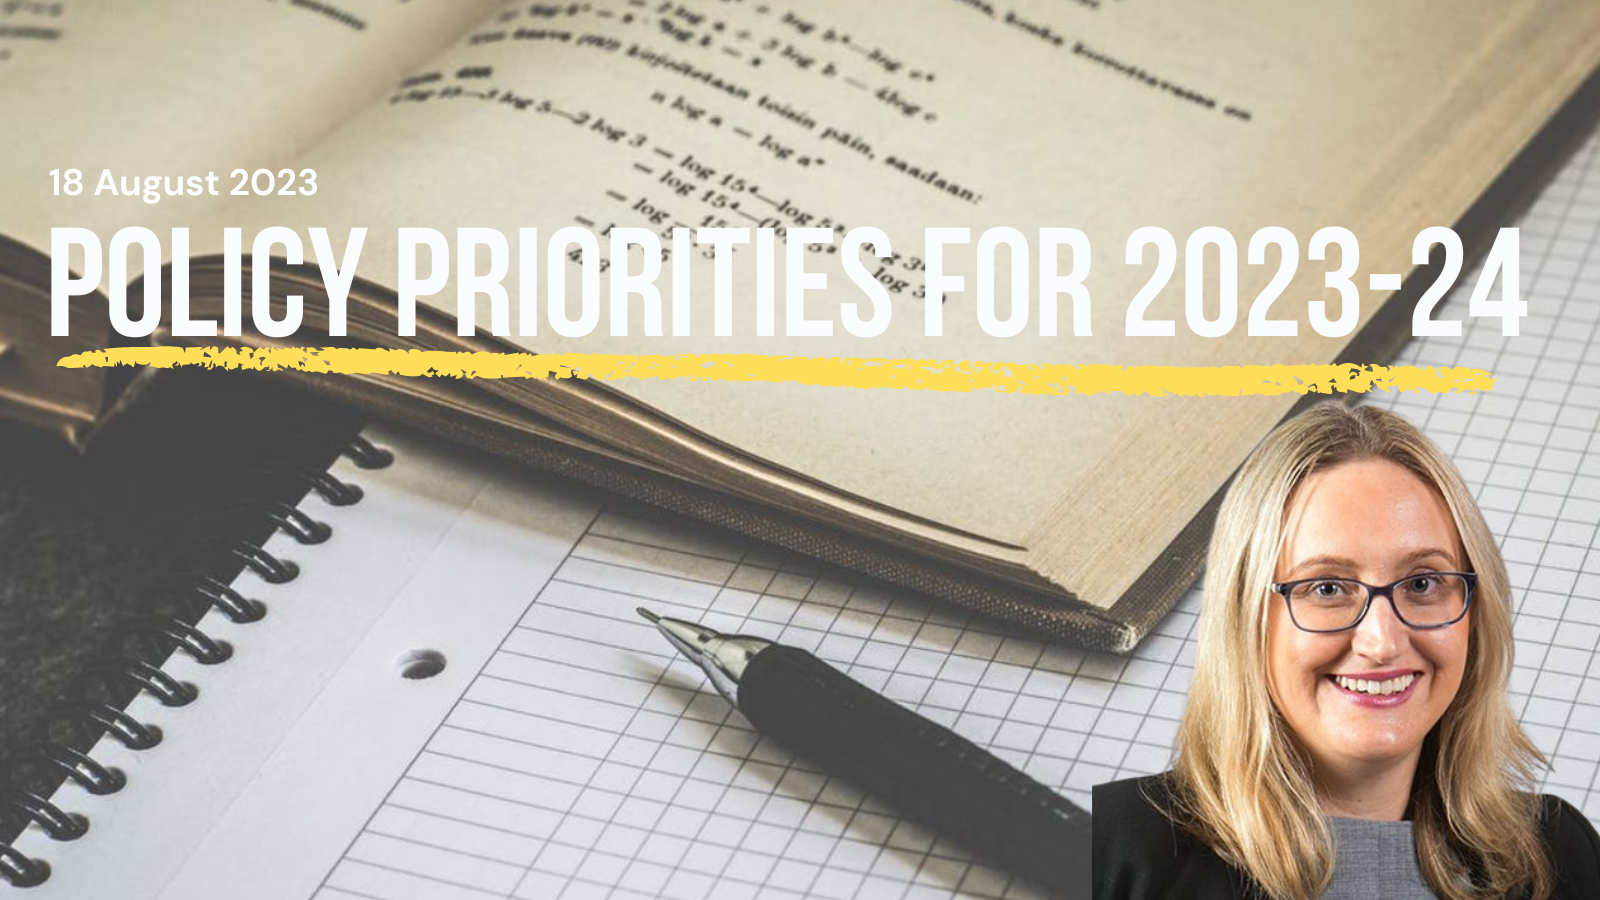 87. Priorities for 2023 and 2024